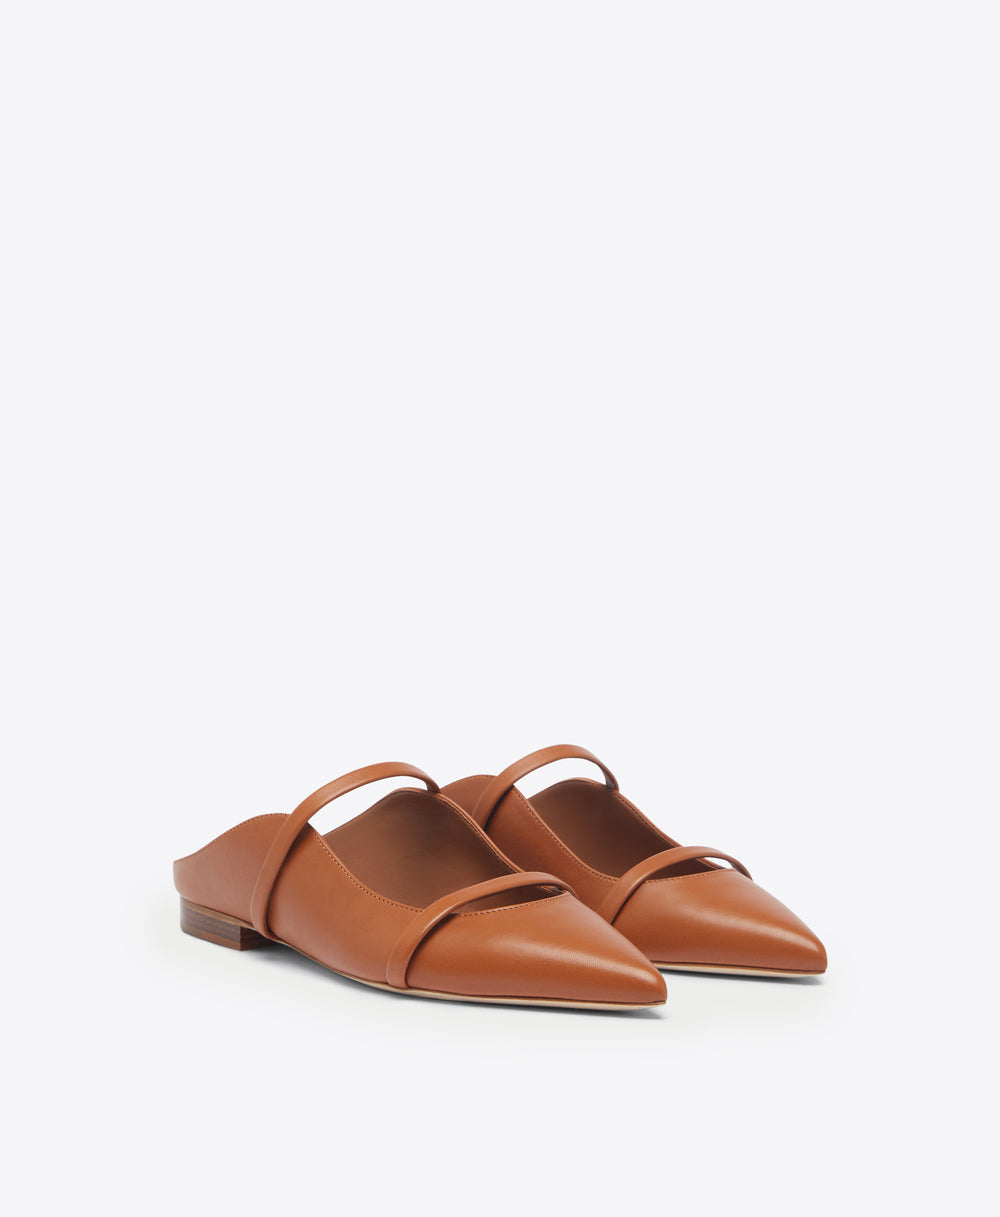 Malone Souliers Maureen Brown Leather Flat Mules